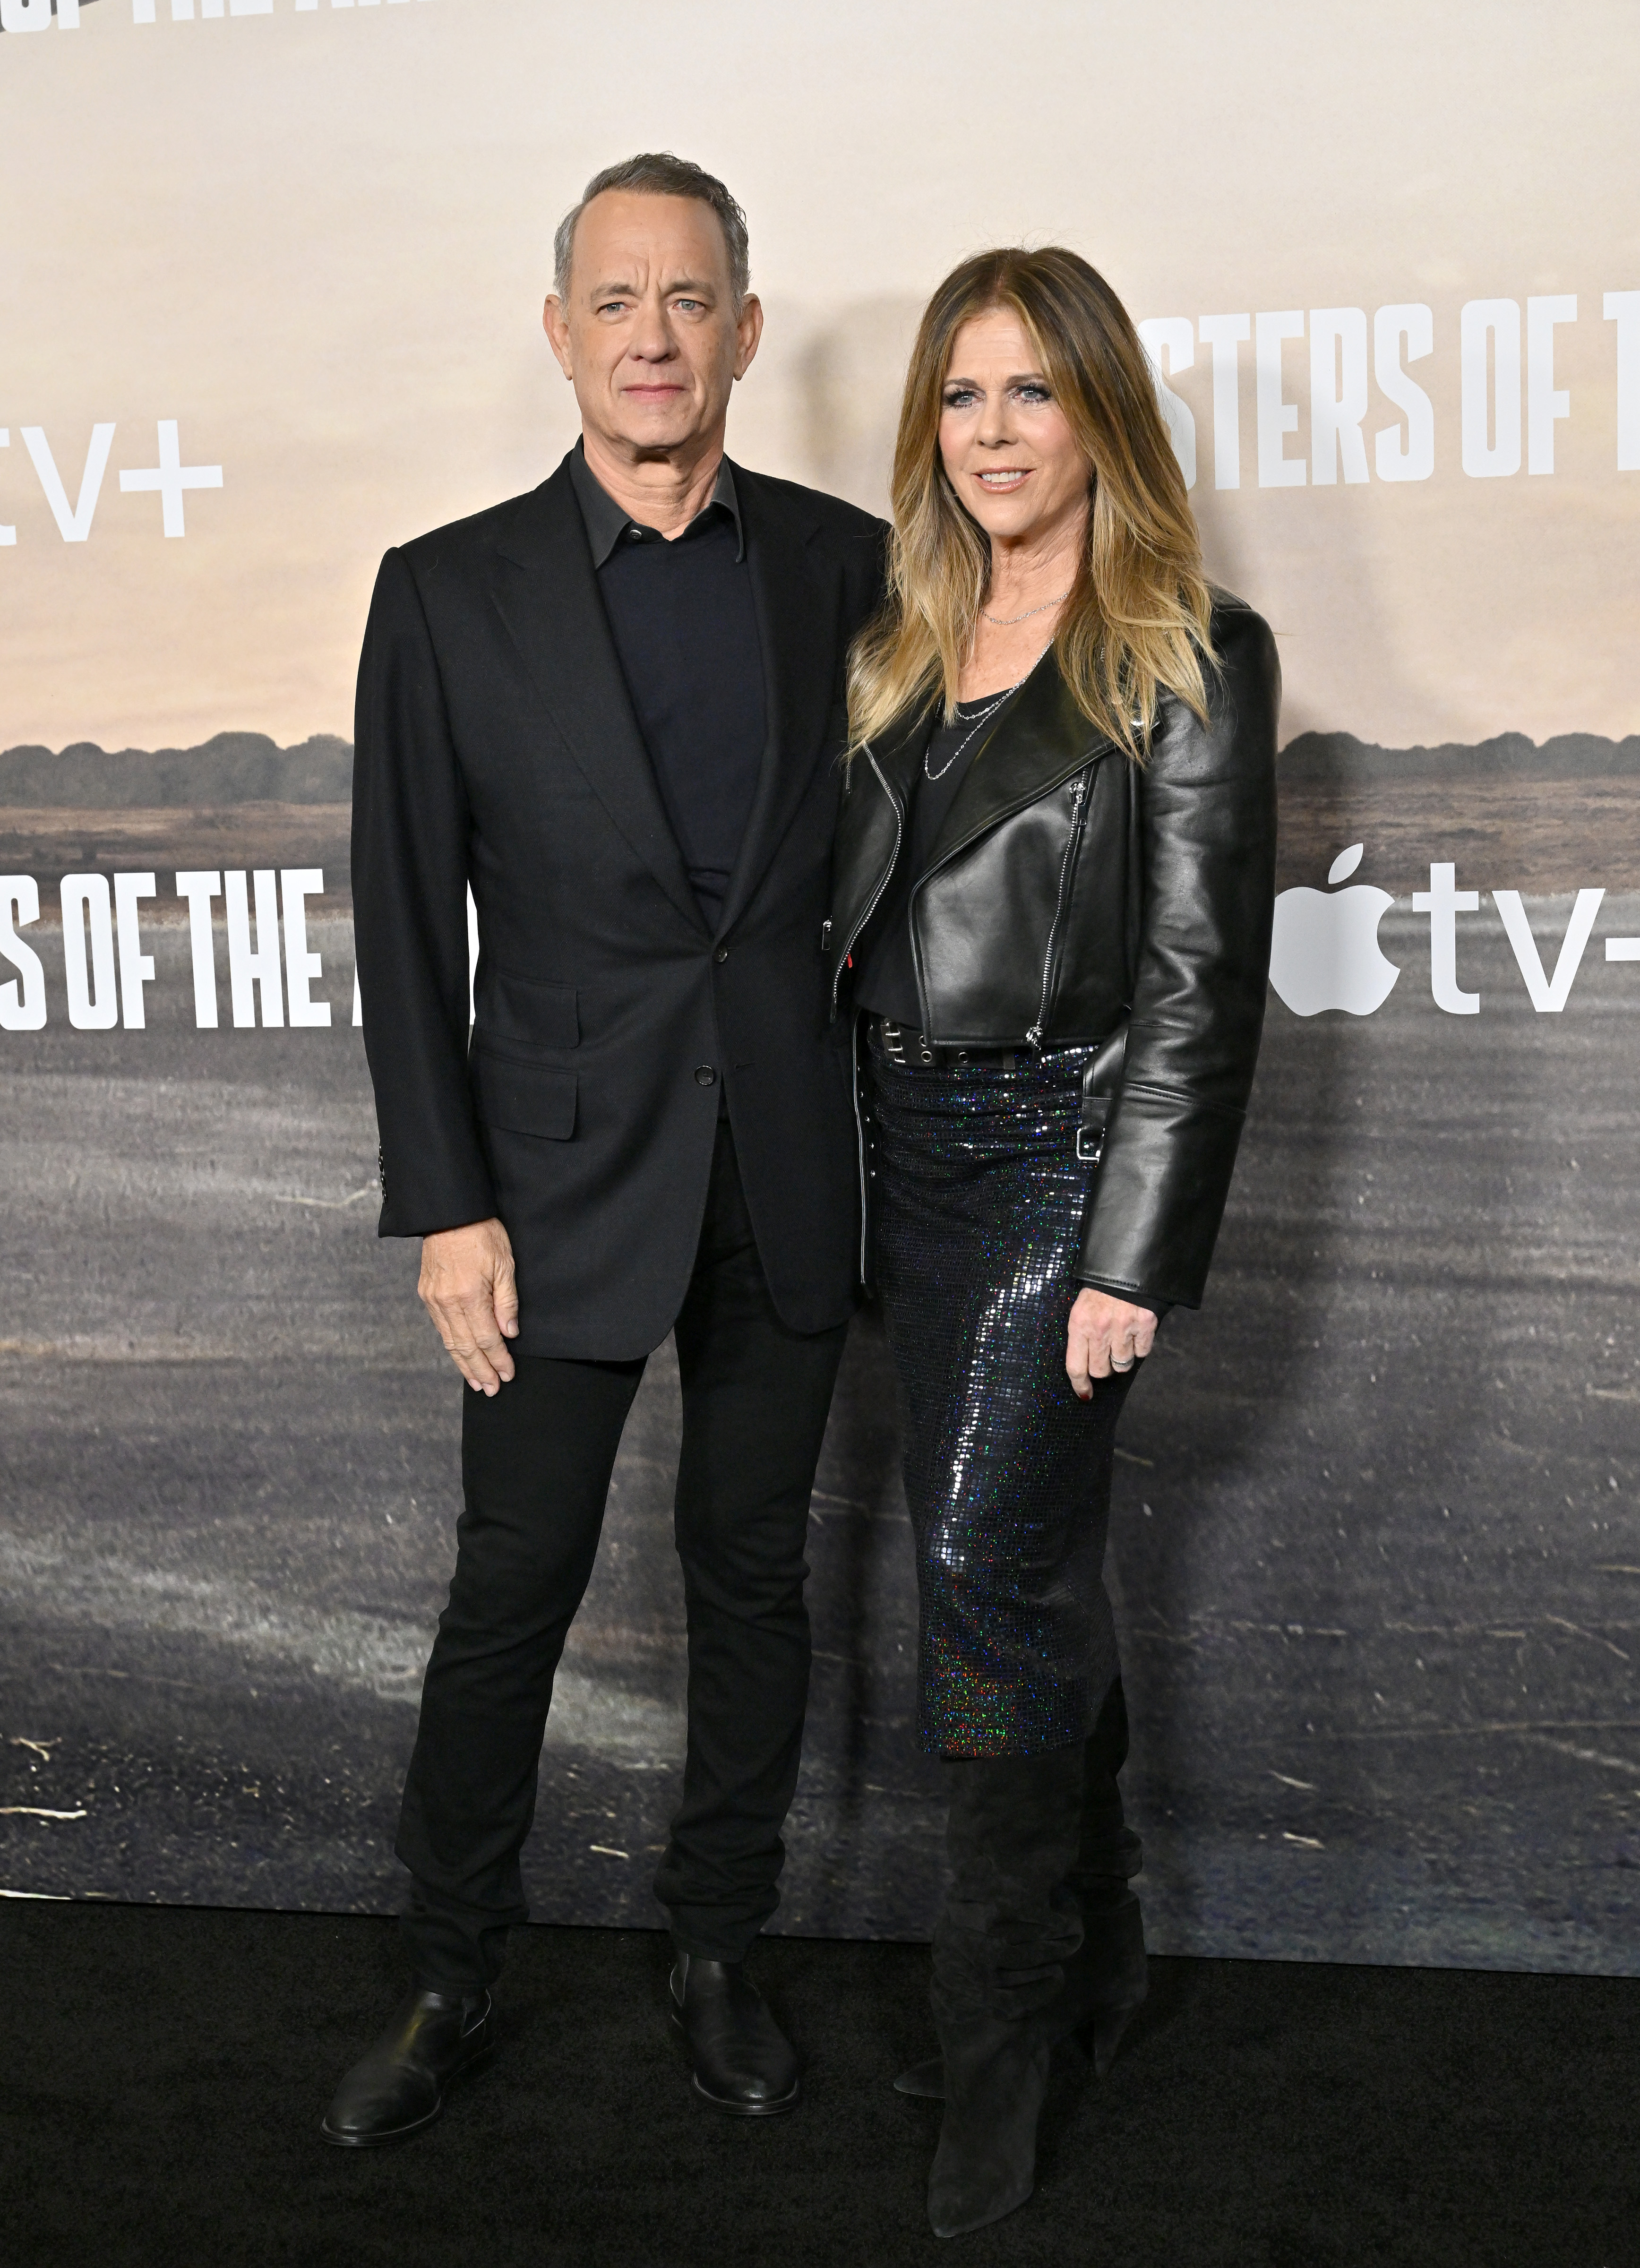 Tom Hanks and Rita Wilson at the world premiere of "Masters of the Air" in Los Angeles, California, on January 10, 2024. | Source: Getty Images